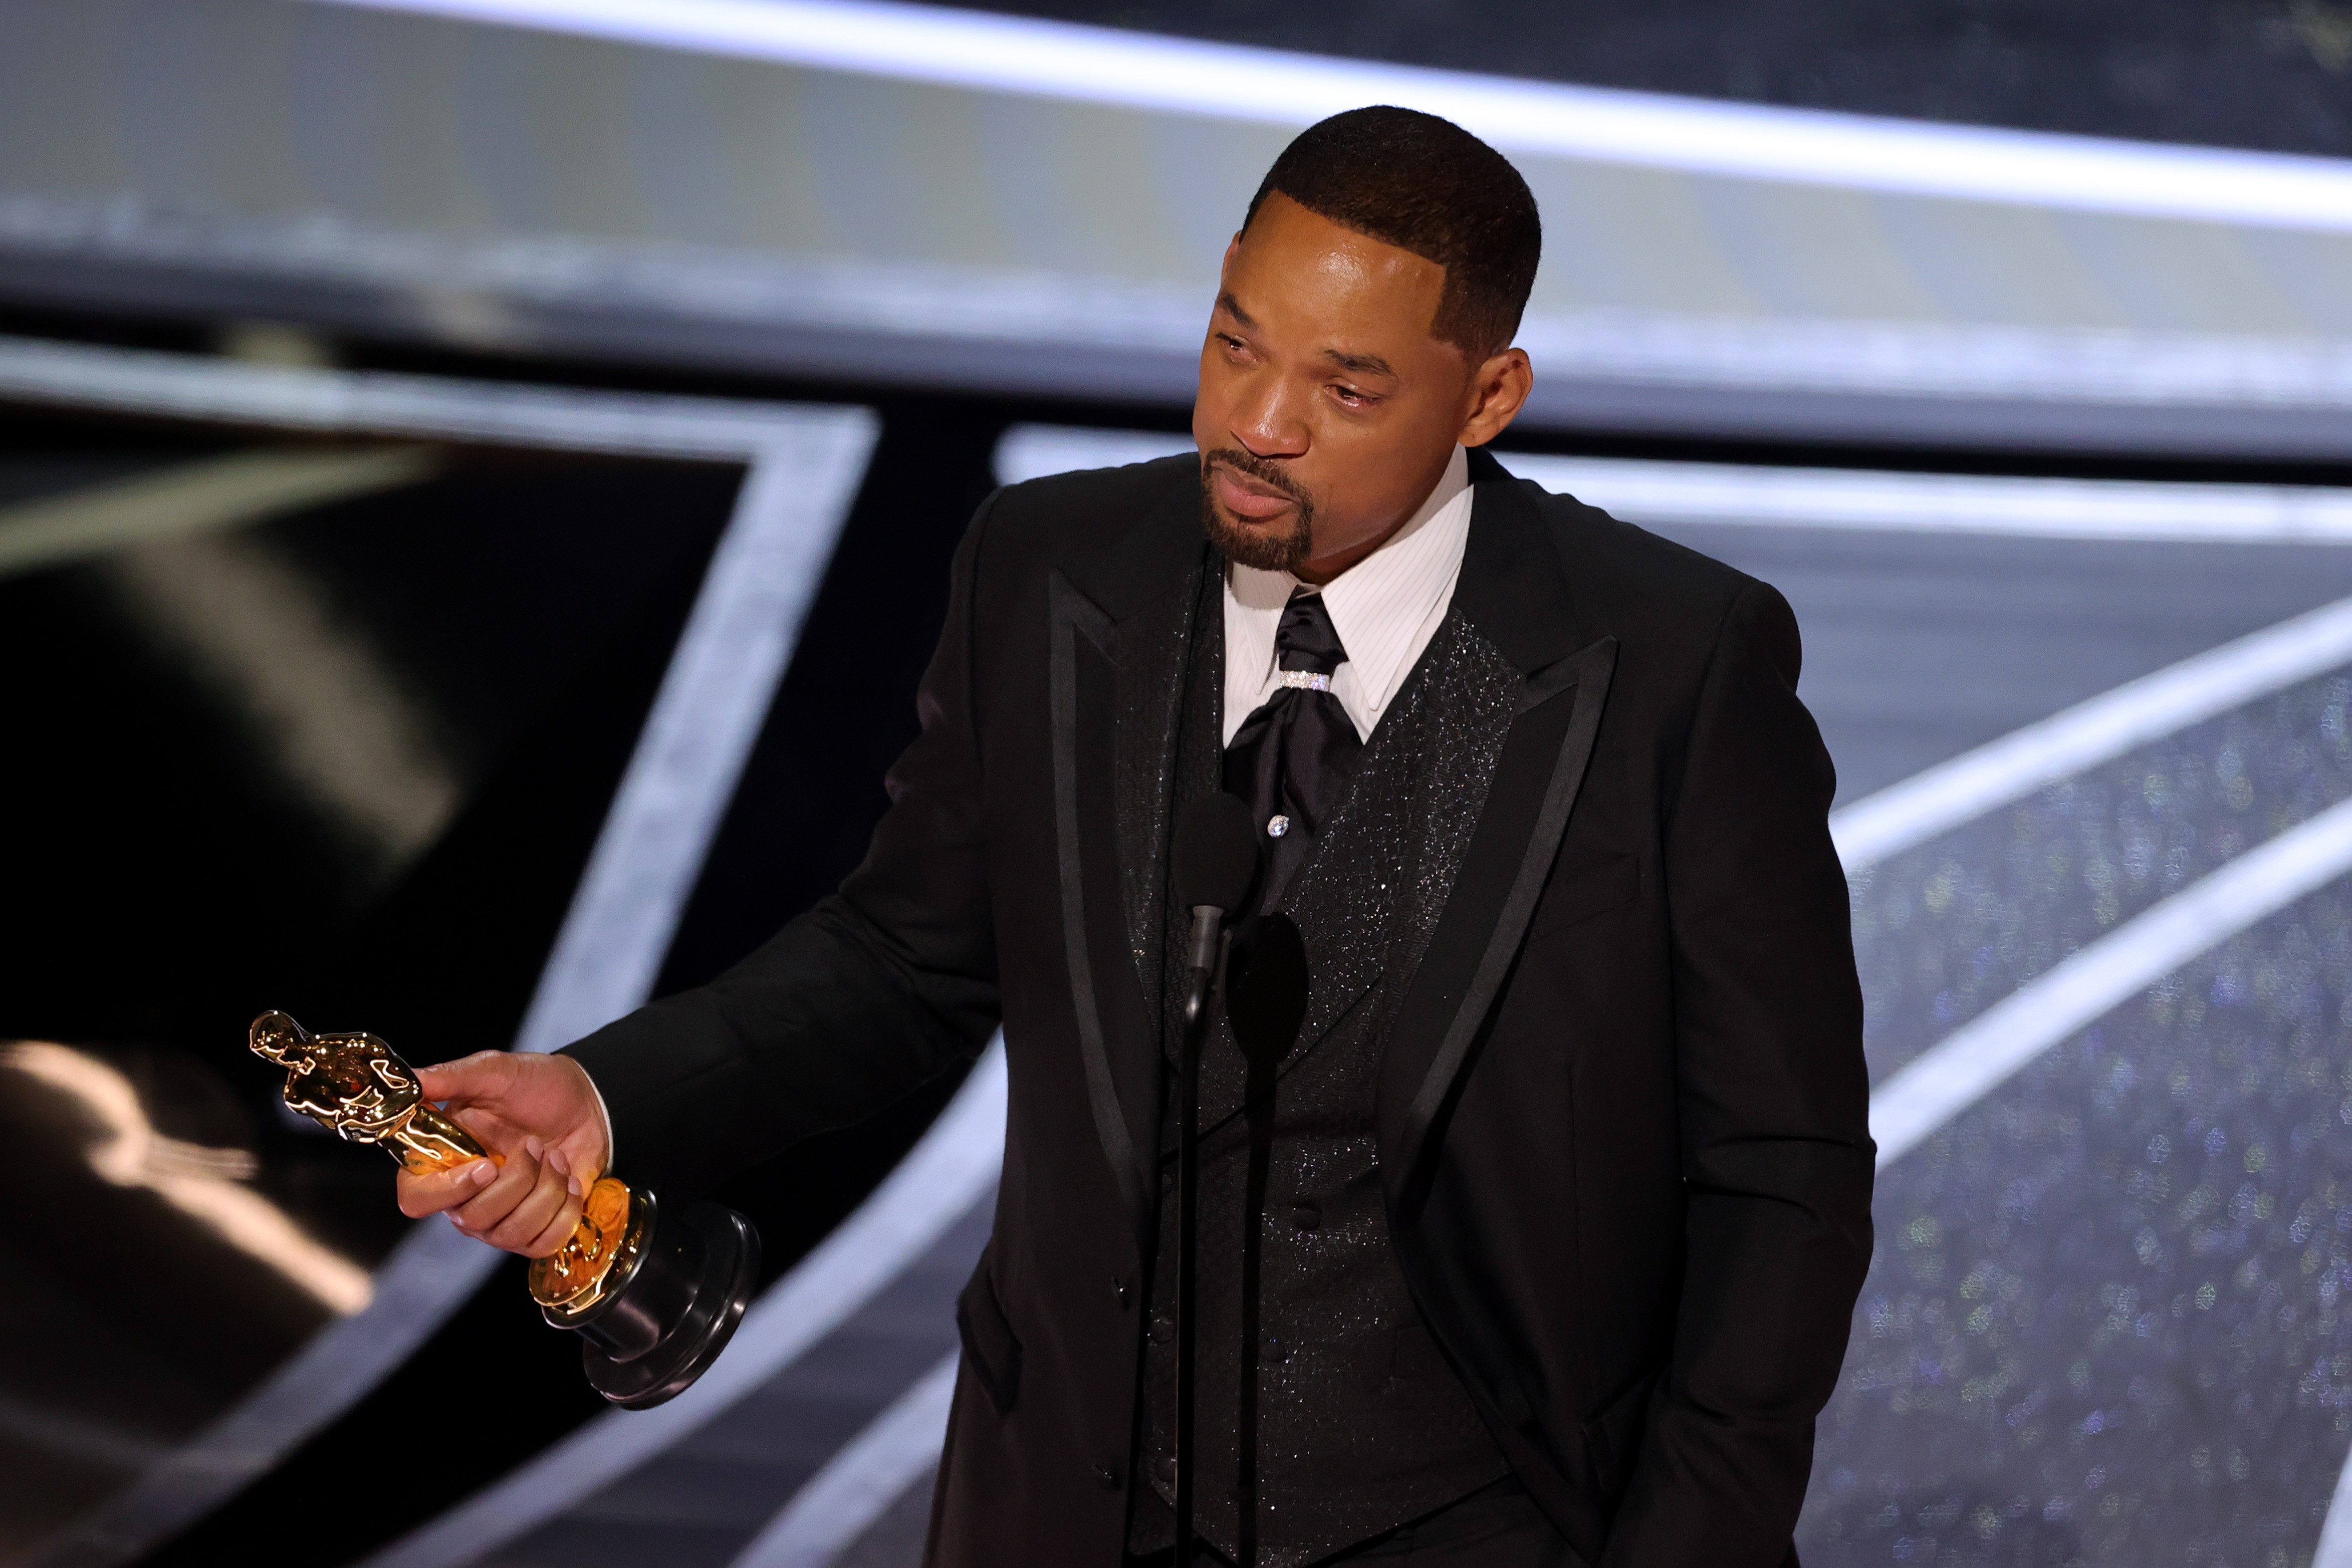 HOLLYWOOD, CALIFORNIA - MARCH 27: Will Smith accepts the Actor in a Leading Role award for ‘King Richard’ onstage during the 94th Annual Academy Awards at Dolby Theatre on March 27, 2022 in Hollywood, California. (Photo by Neilson Barnard/Getty Images) (Foto: Getty Images)